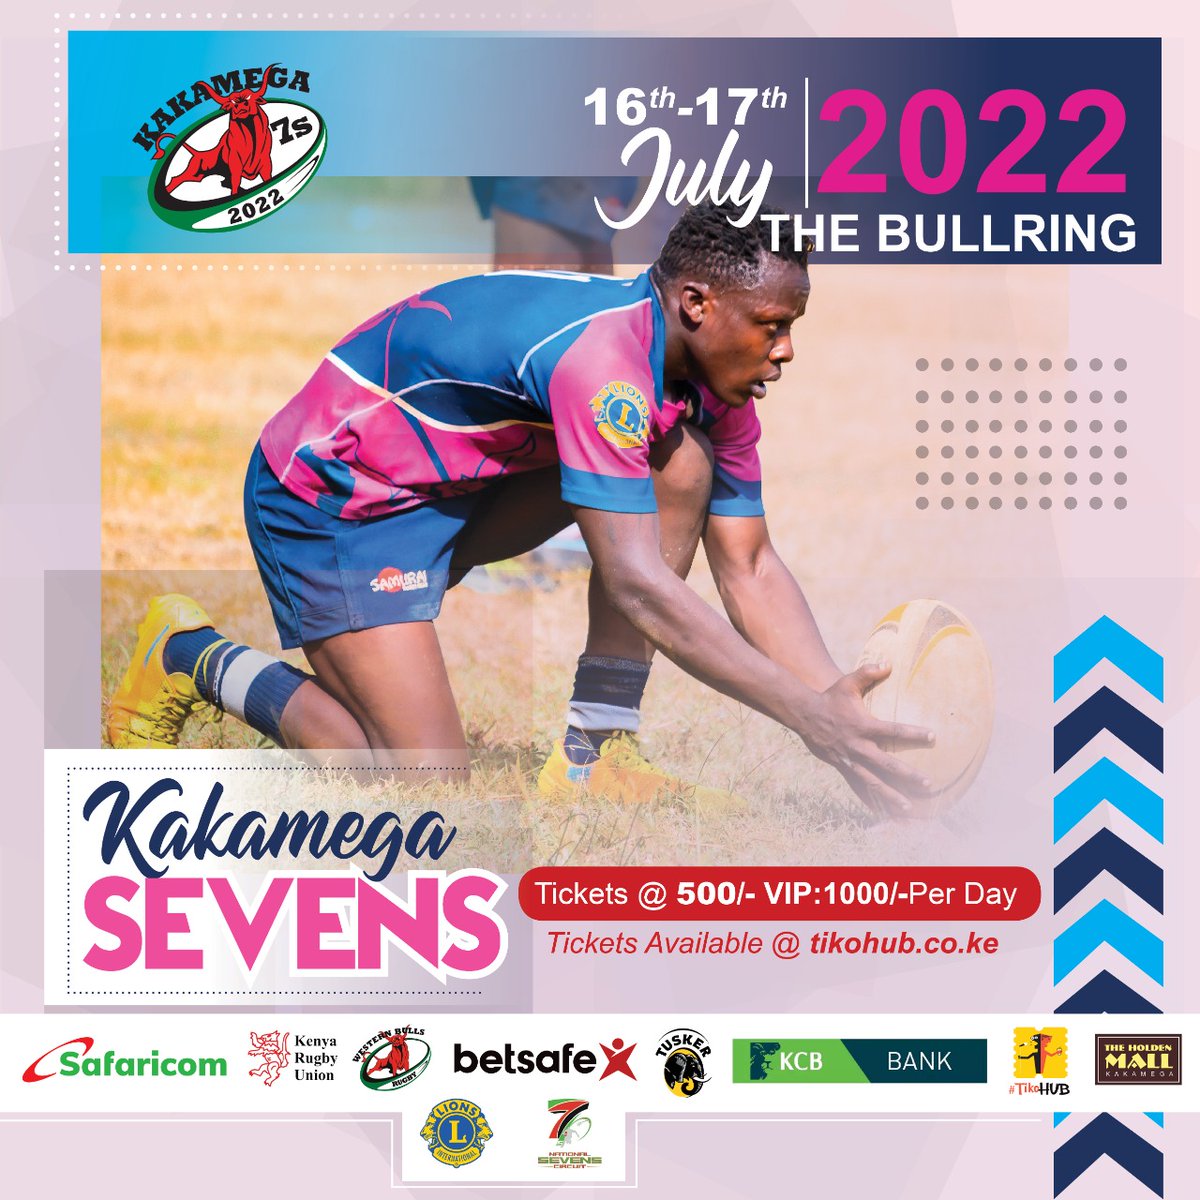 One more sleep... Get your 🎟 below! tikohub.co.ke/resources/even… KSHS 800 for 2️⃣ days at the #Kakamega7s 😍 Make sure your apart of the action this weekend!